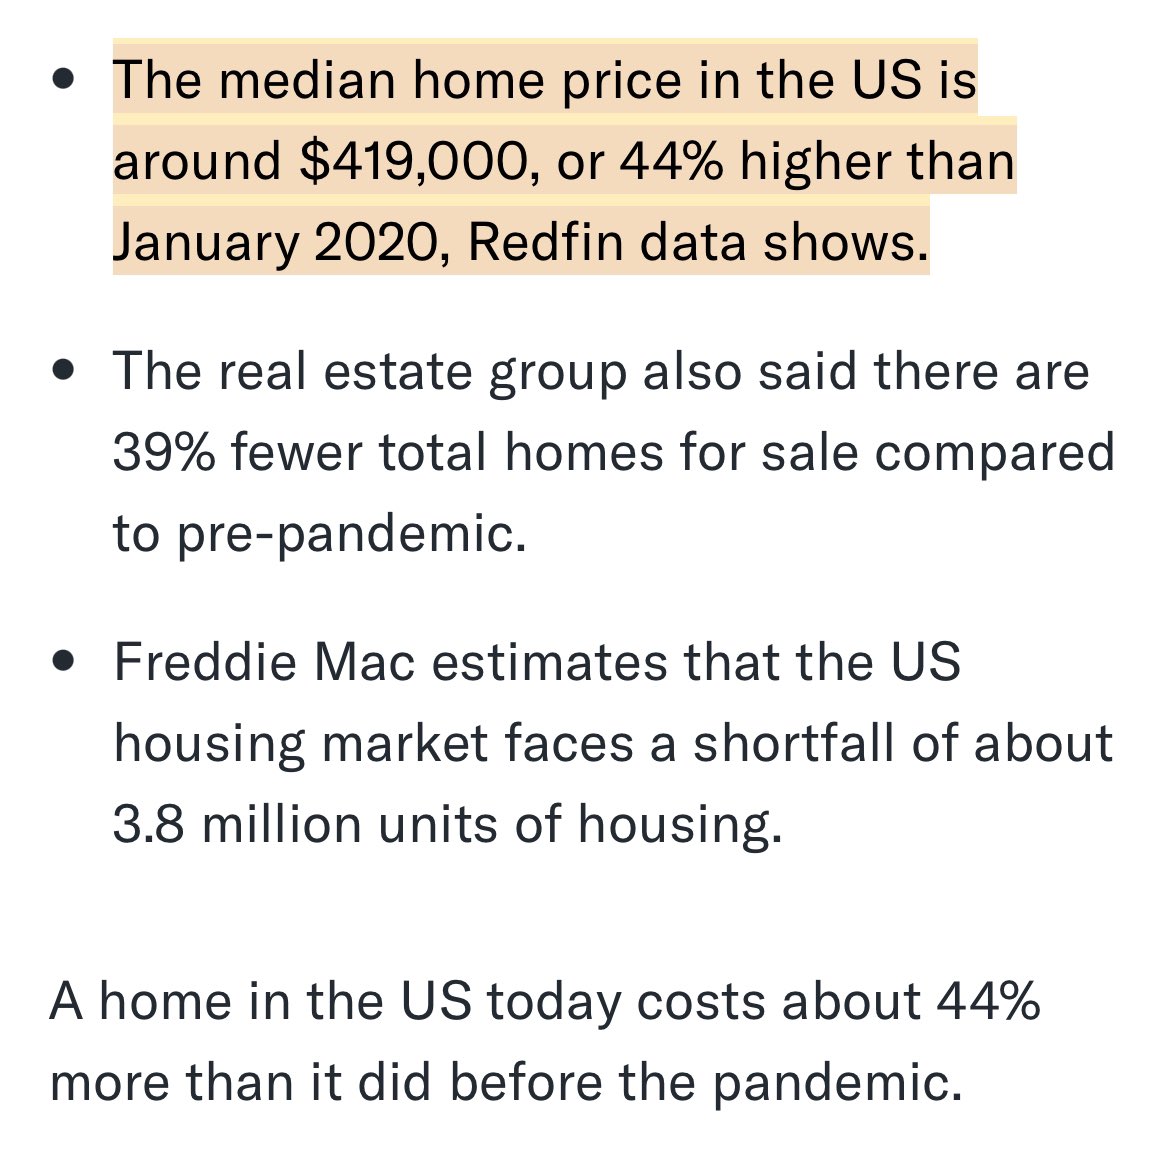 EVERYTHING is getting more and more expensive. Constantly. With no relief in sight. How long is this all going to be sustainable? Thoughts? #inflation #finance #housing #homecosts #data #redfin #ushousingmarket #sustainable #whatarewegoingtodo #living #livingexpenses #gas #food